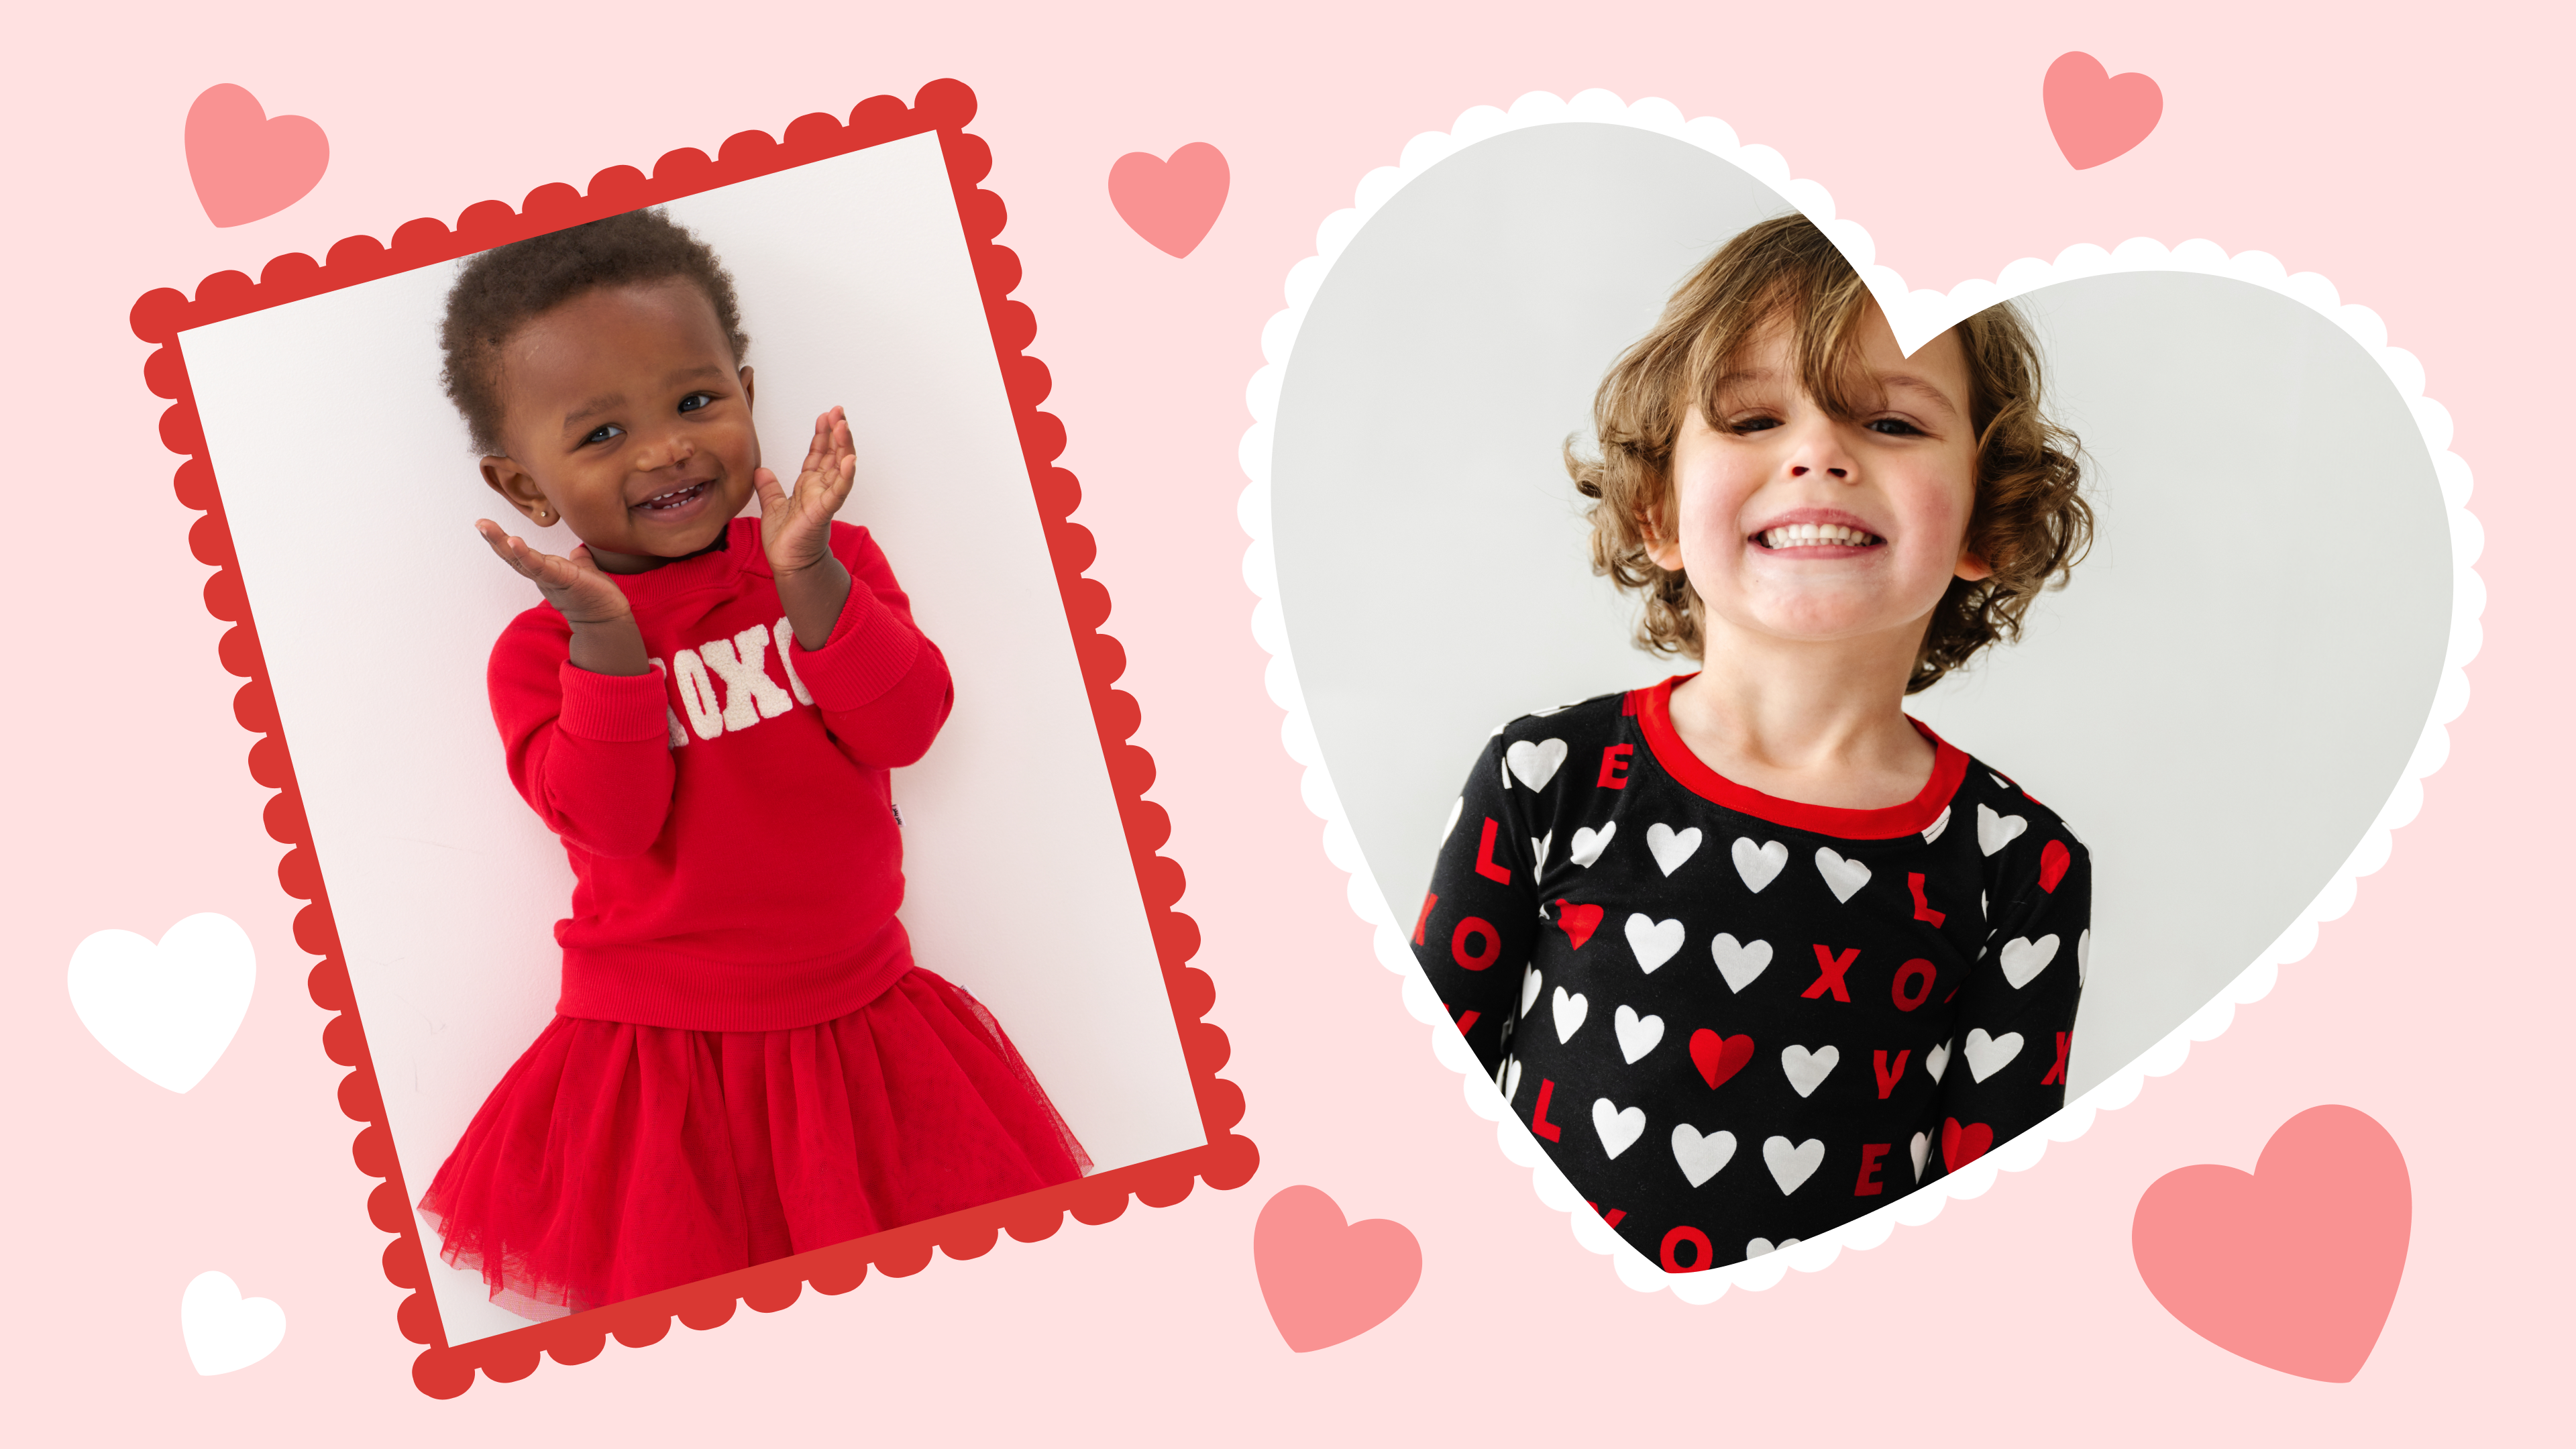 Five Sweet Ideas for Valentine’s Day Fun With Kids